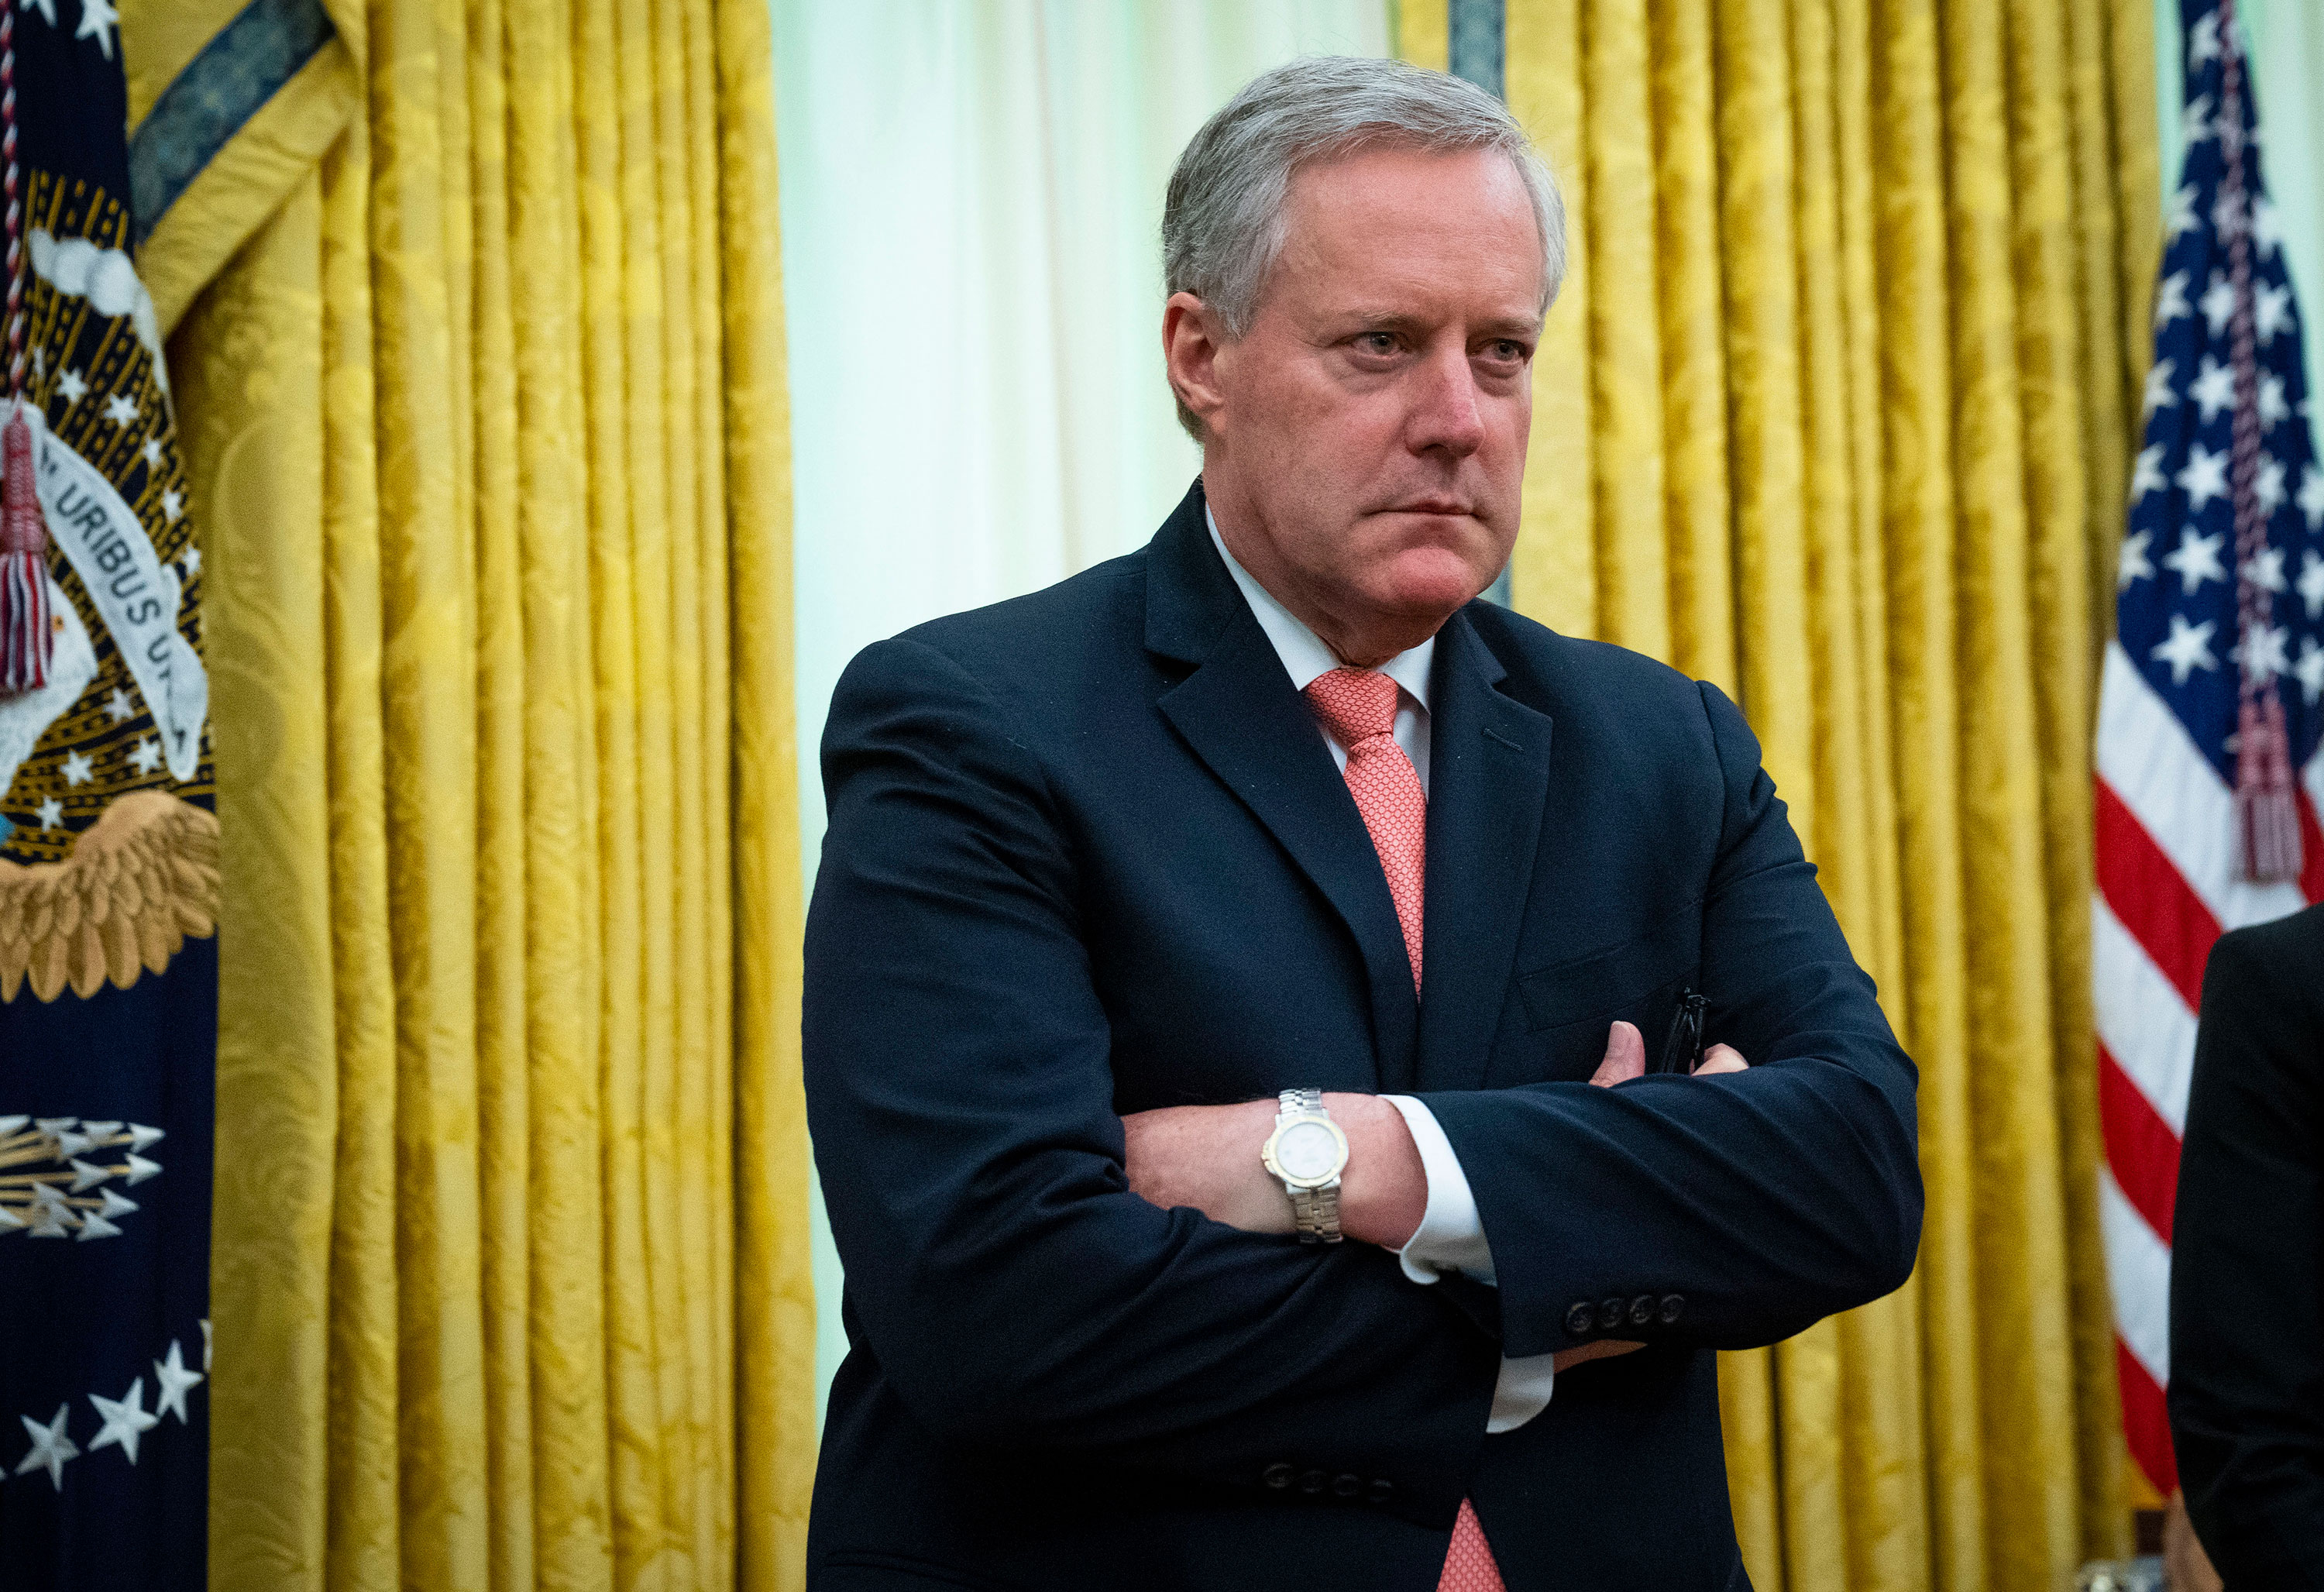 Former White House chief of staff Mark Meadows listens during a meeting in the Oval Office of the White House in April 2020.